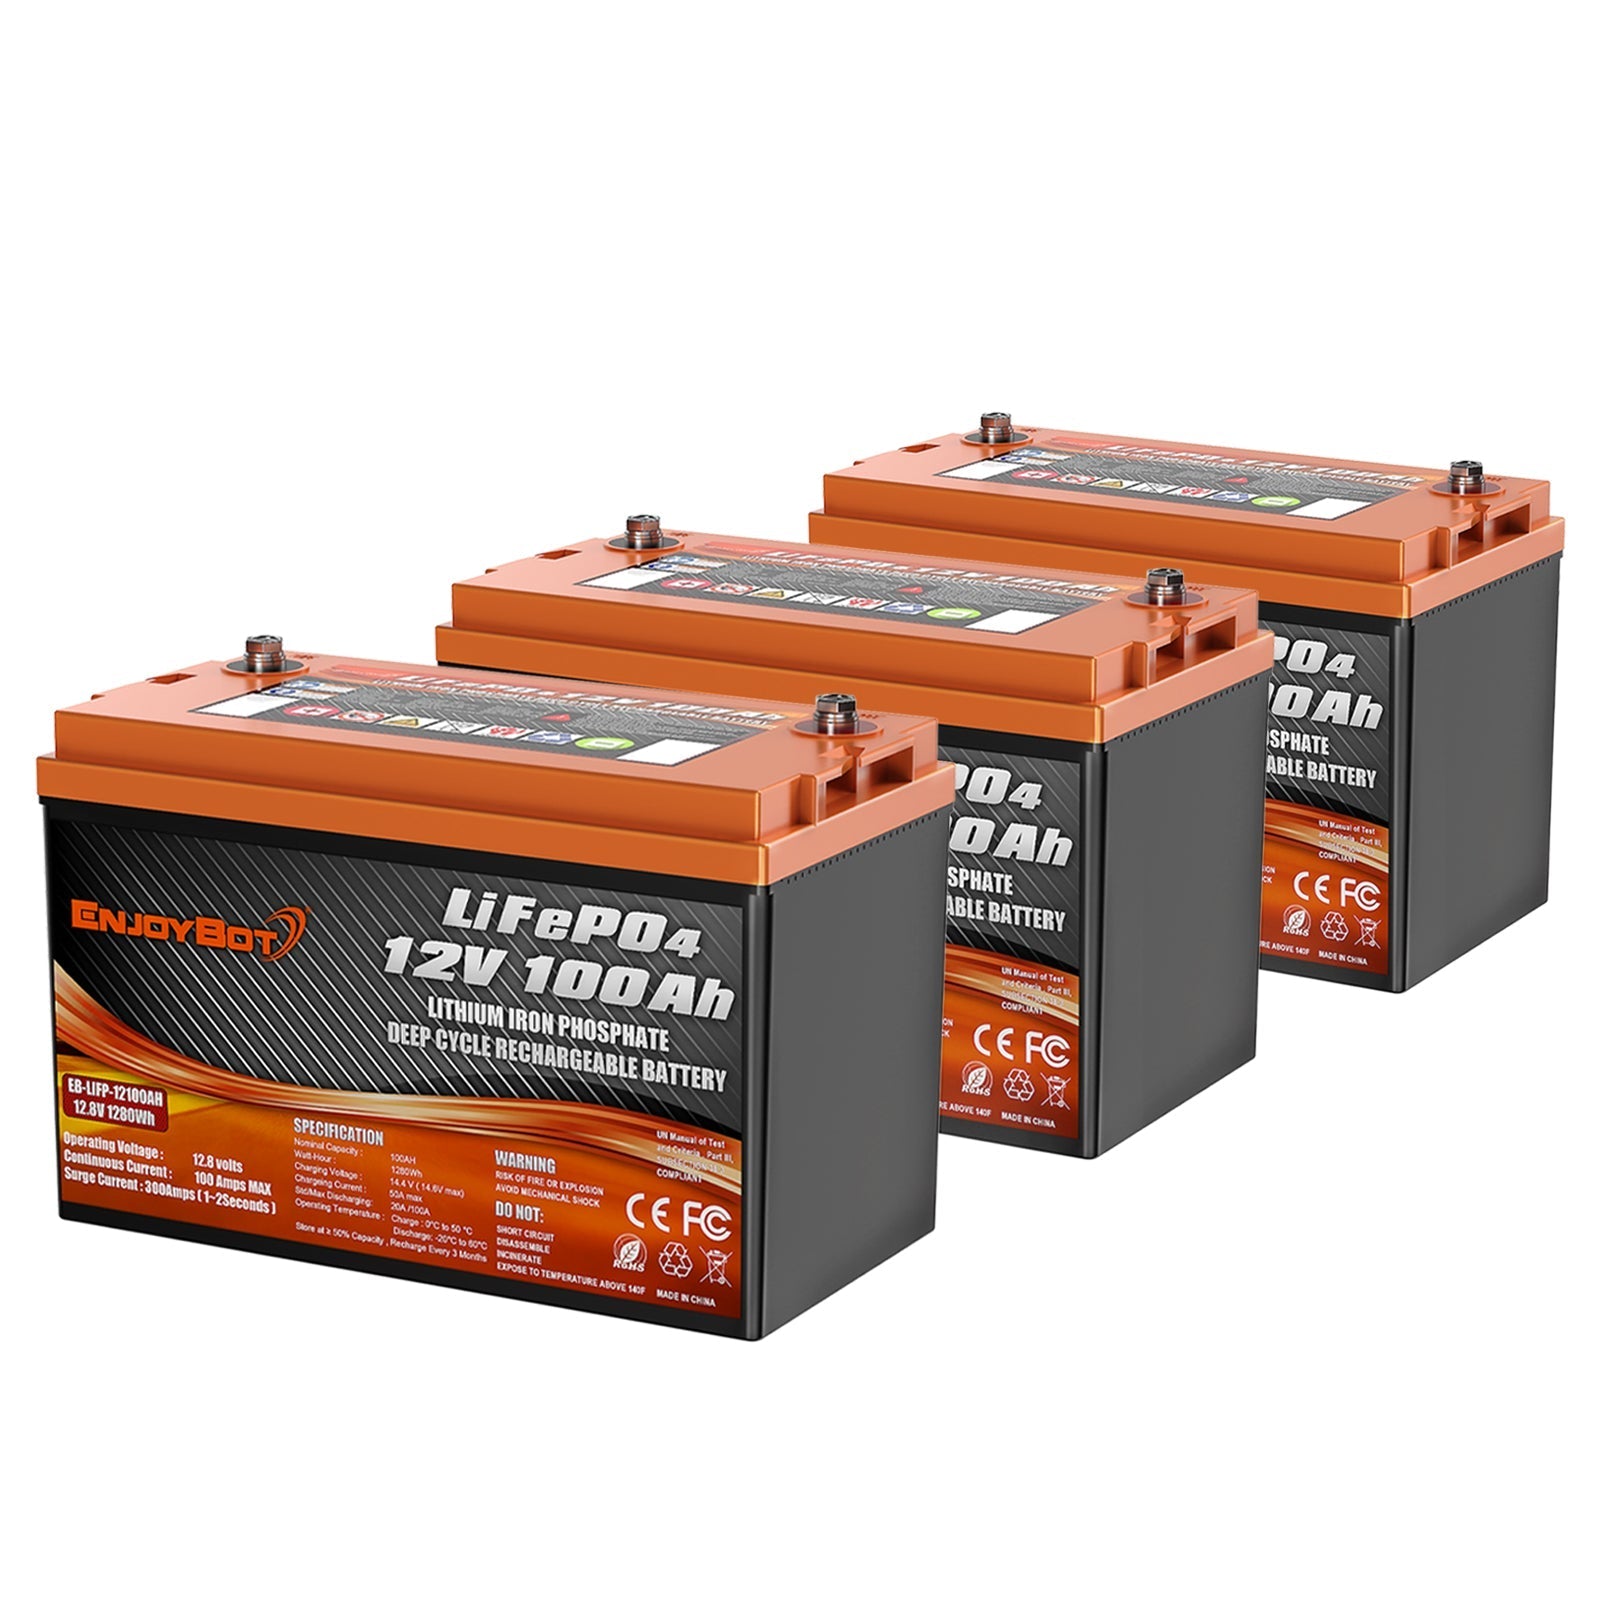 Group 31 12V 100Ah LiFePO4 battery replaces lead acid - Professional Lithium  Battery Manufacturer Vendor.